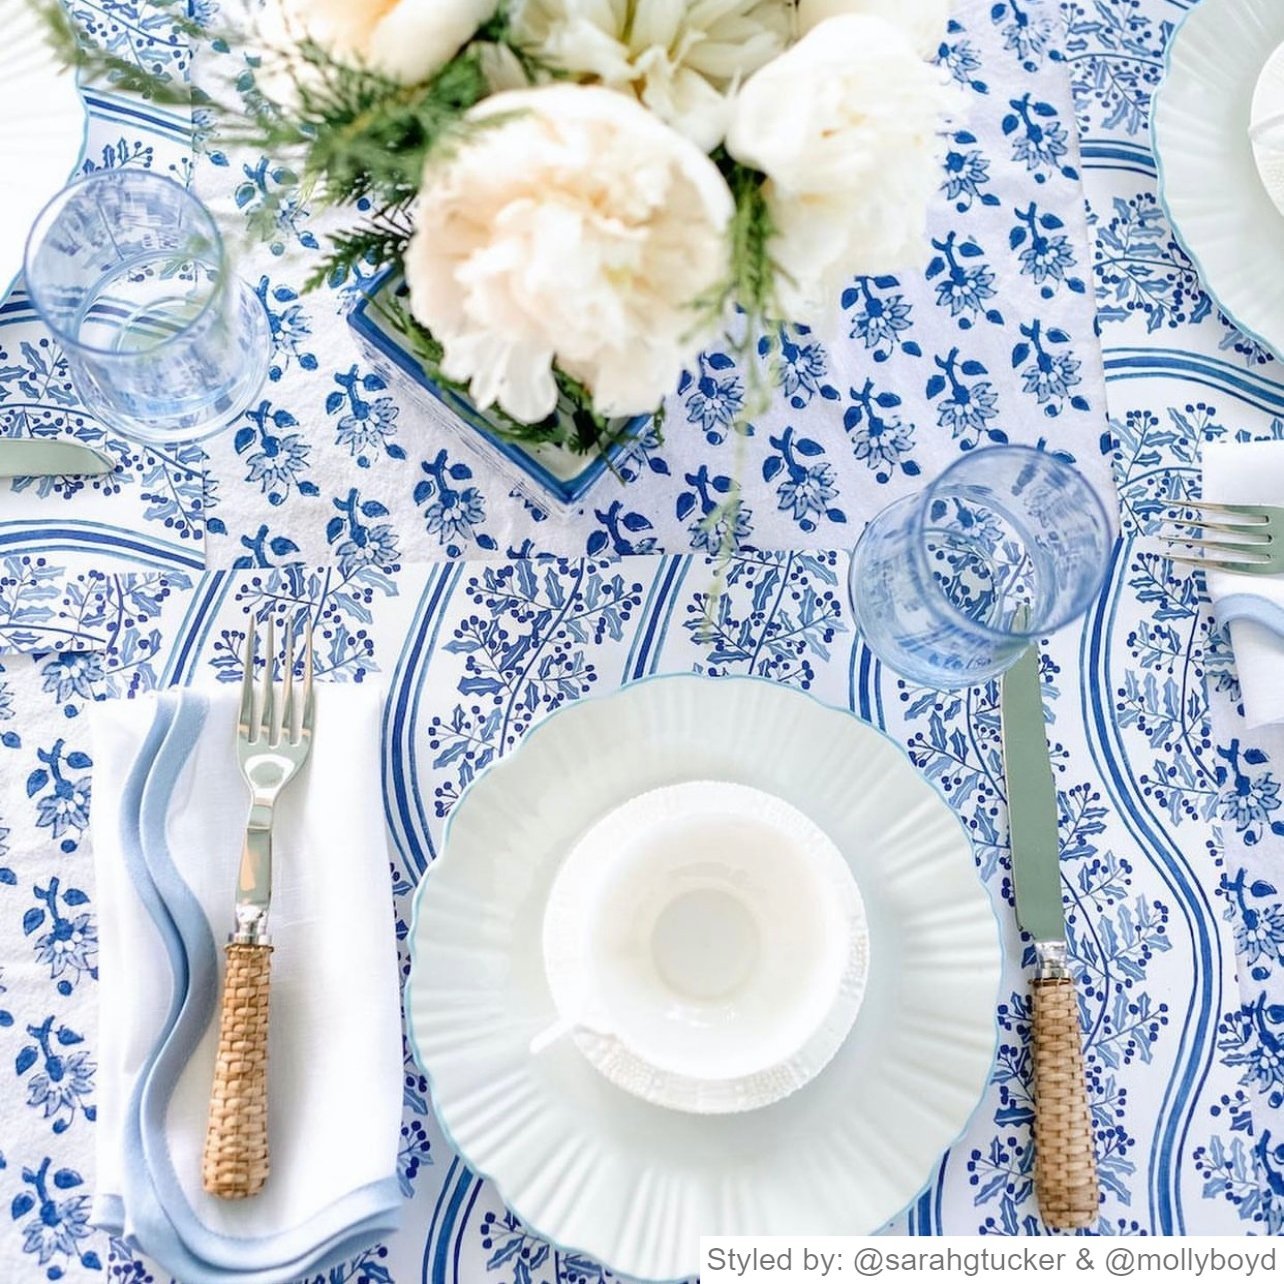 Blue and white holly paper placemat layered with white dishes and a teacup on a blue and white floral tablecloth